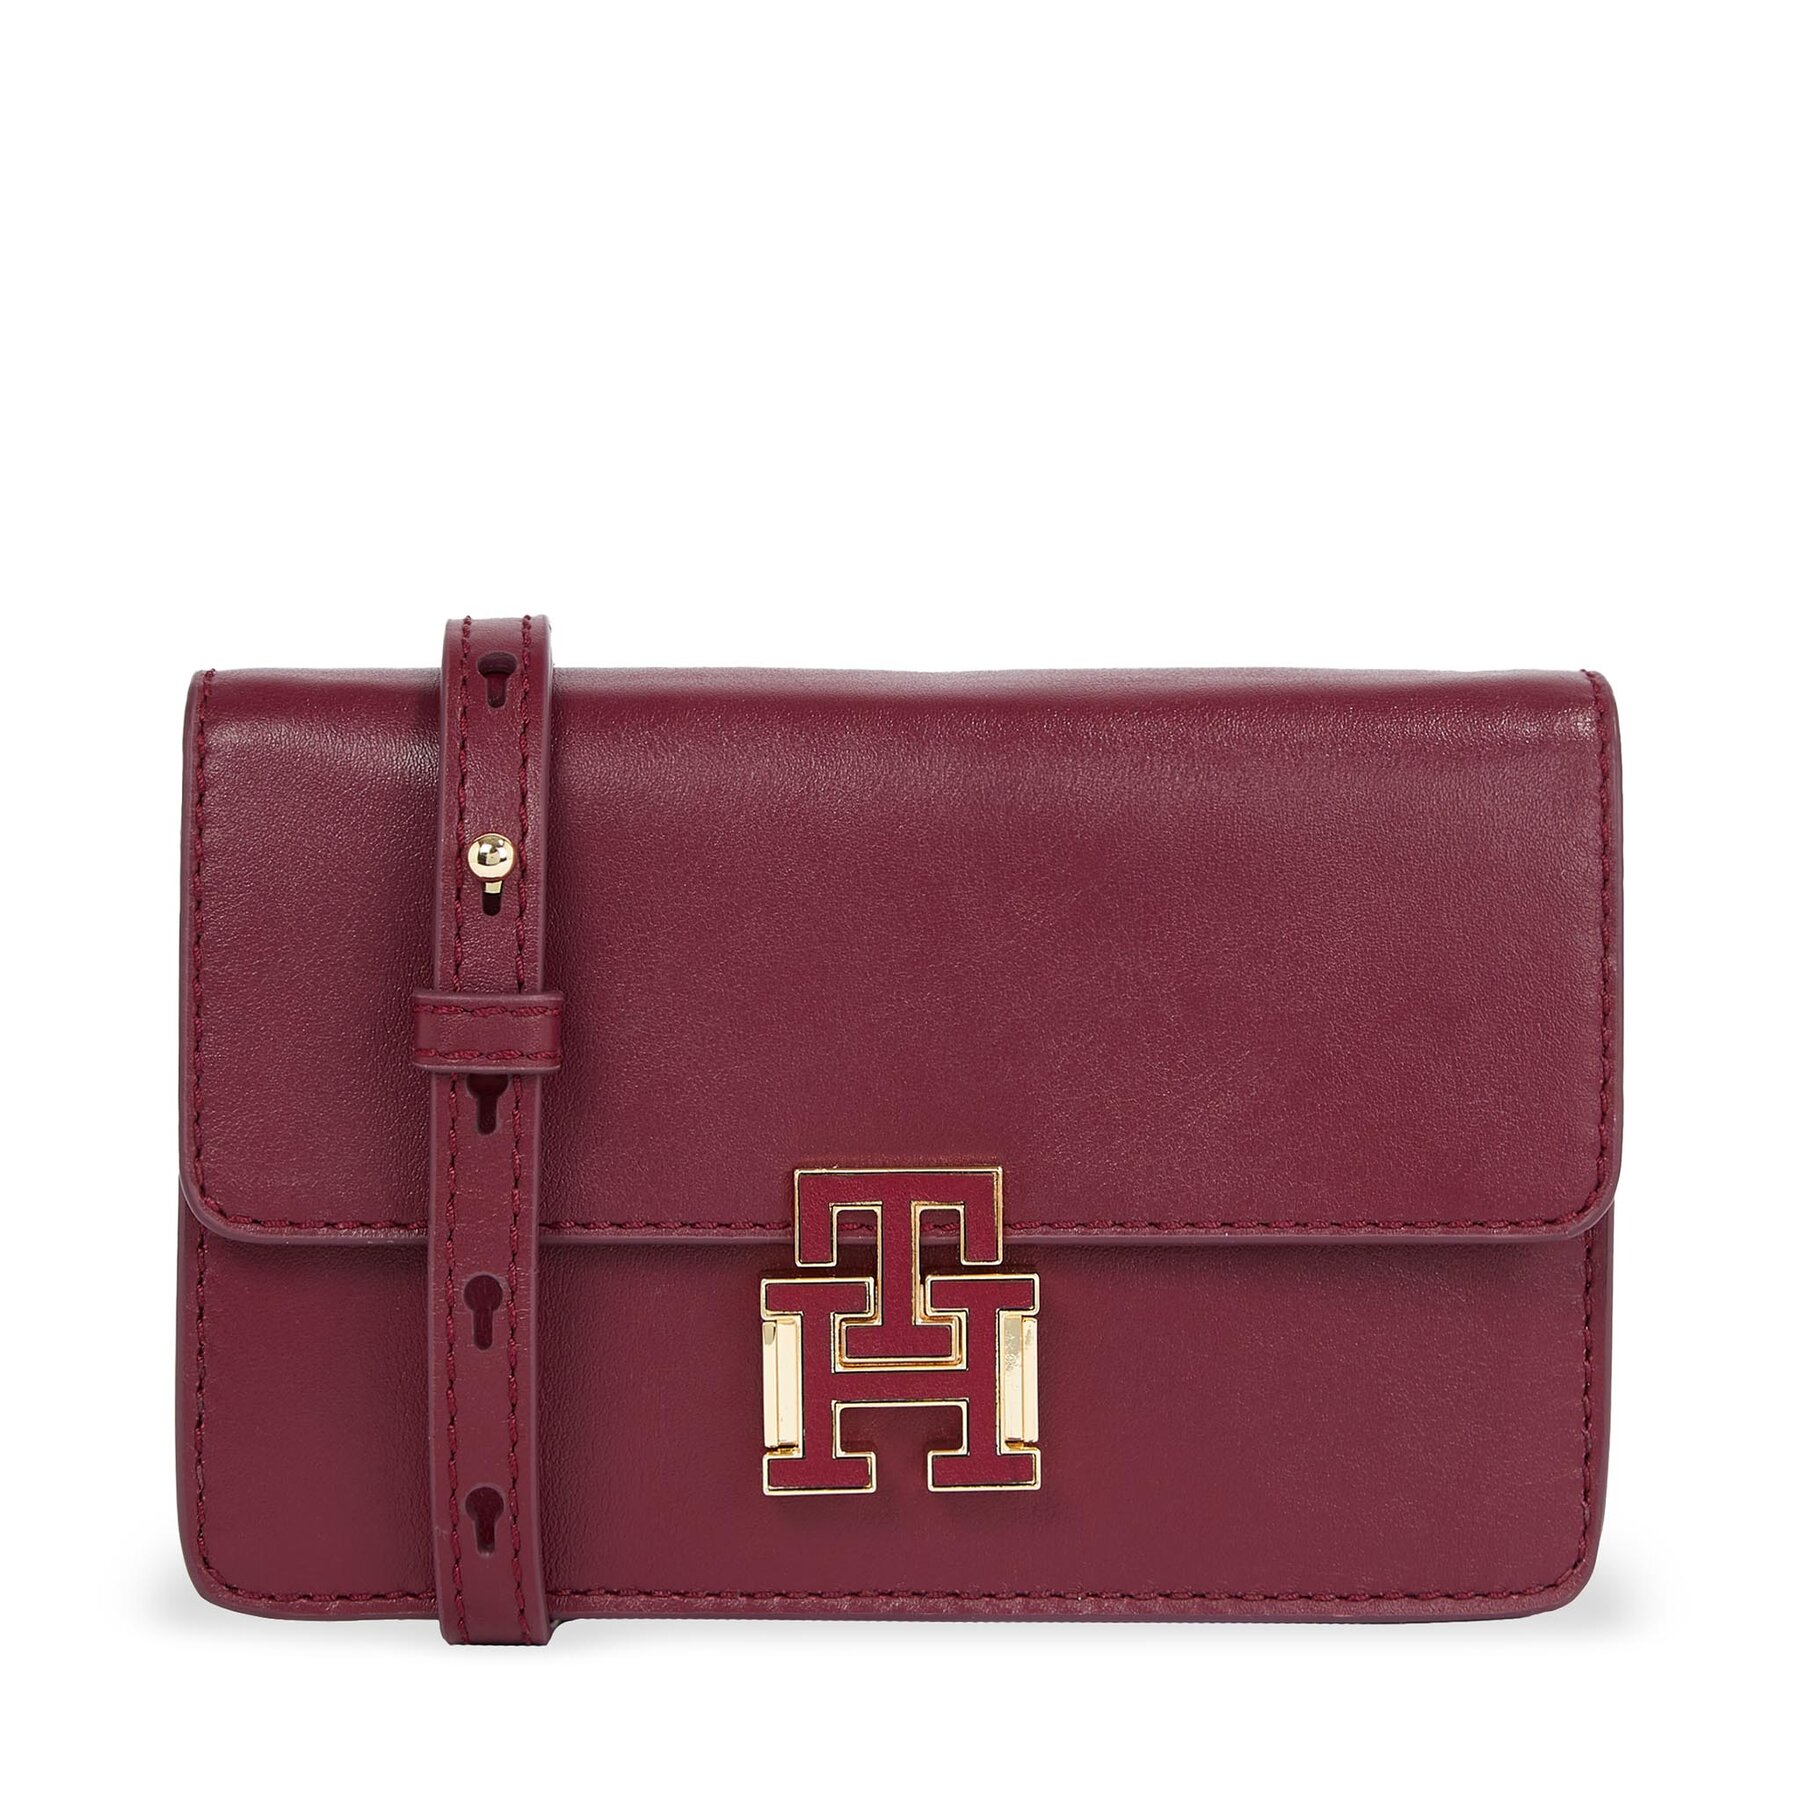 Handtasche Tommy Hilfiger Pushlock Leather Small Crossover AW0AW15227 Rouge XJS von Tommy Hilfiger